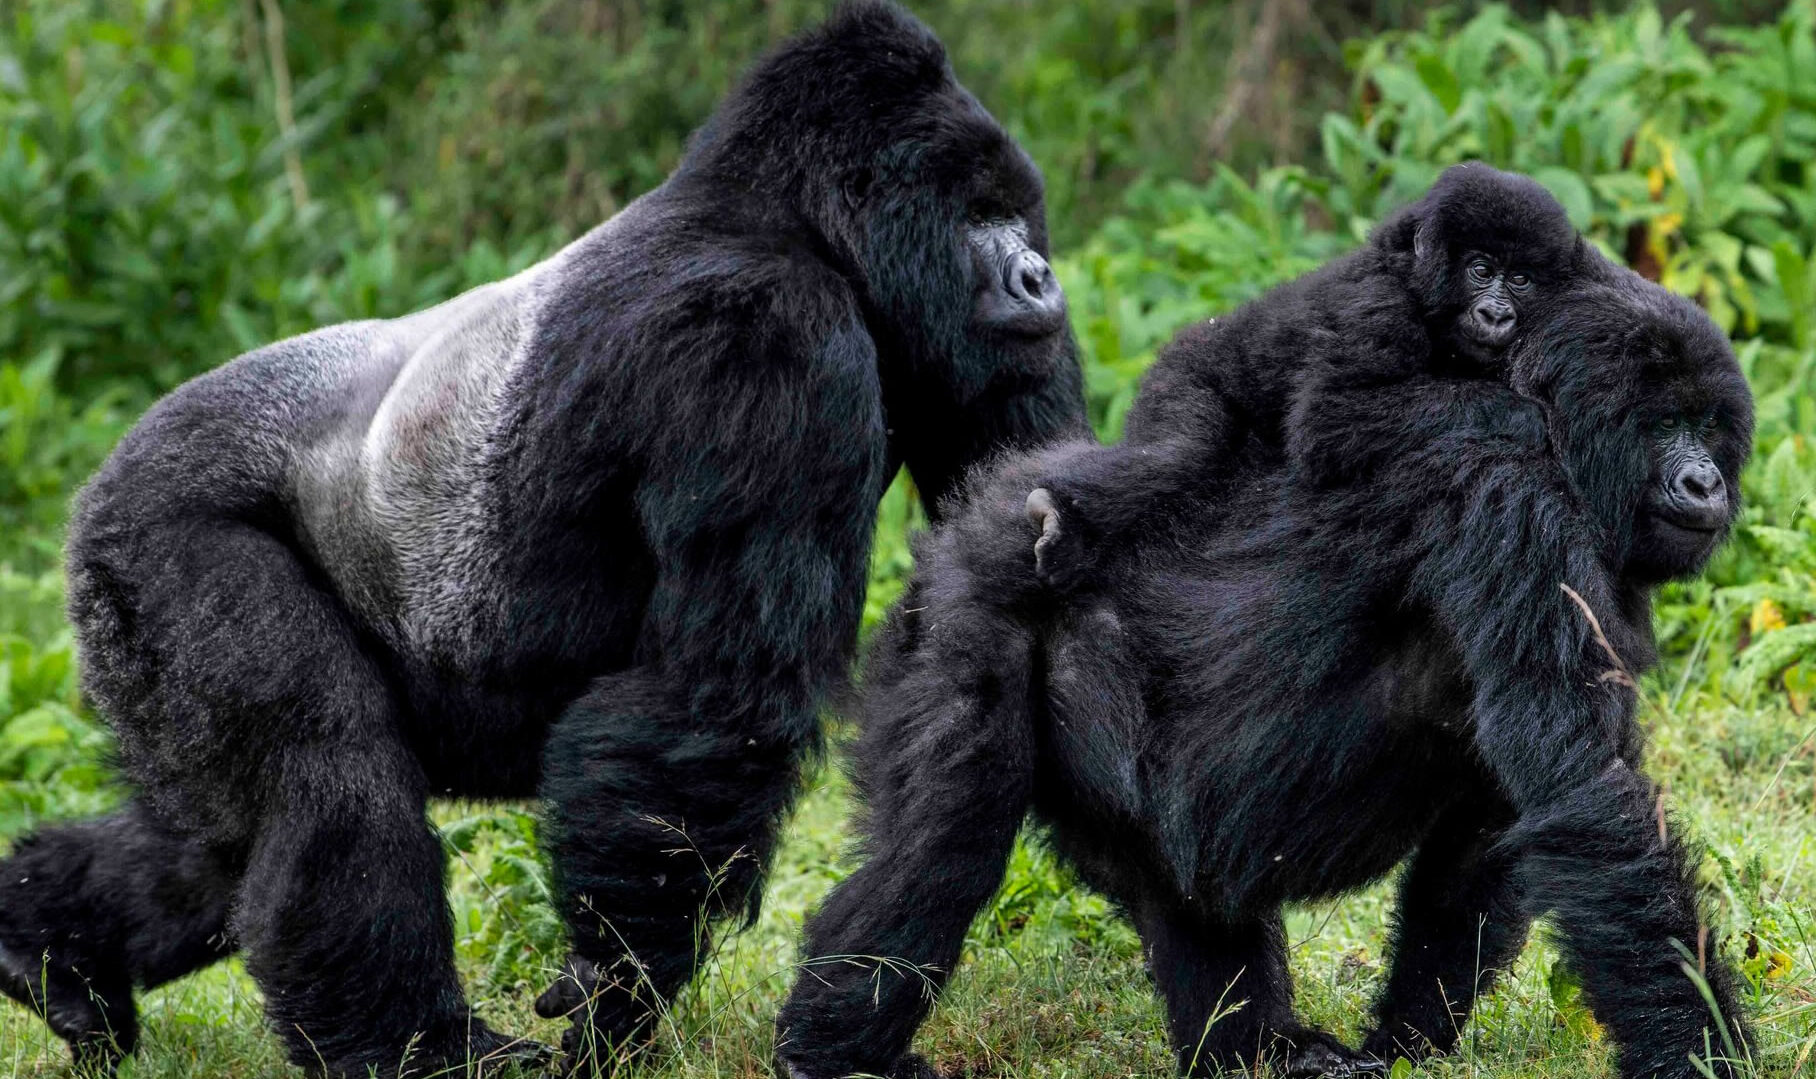 5 day gorilla tracking safari offers you the opportunity to trek mountain gorillas; Trek the interesting Bisoke Mountain (3700m) and Golden monkeys in Volcanoes National Park. Having a chance to see some of the last remaining 700 mountain gorillas in the world is a wonderful experience.